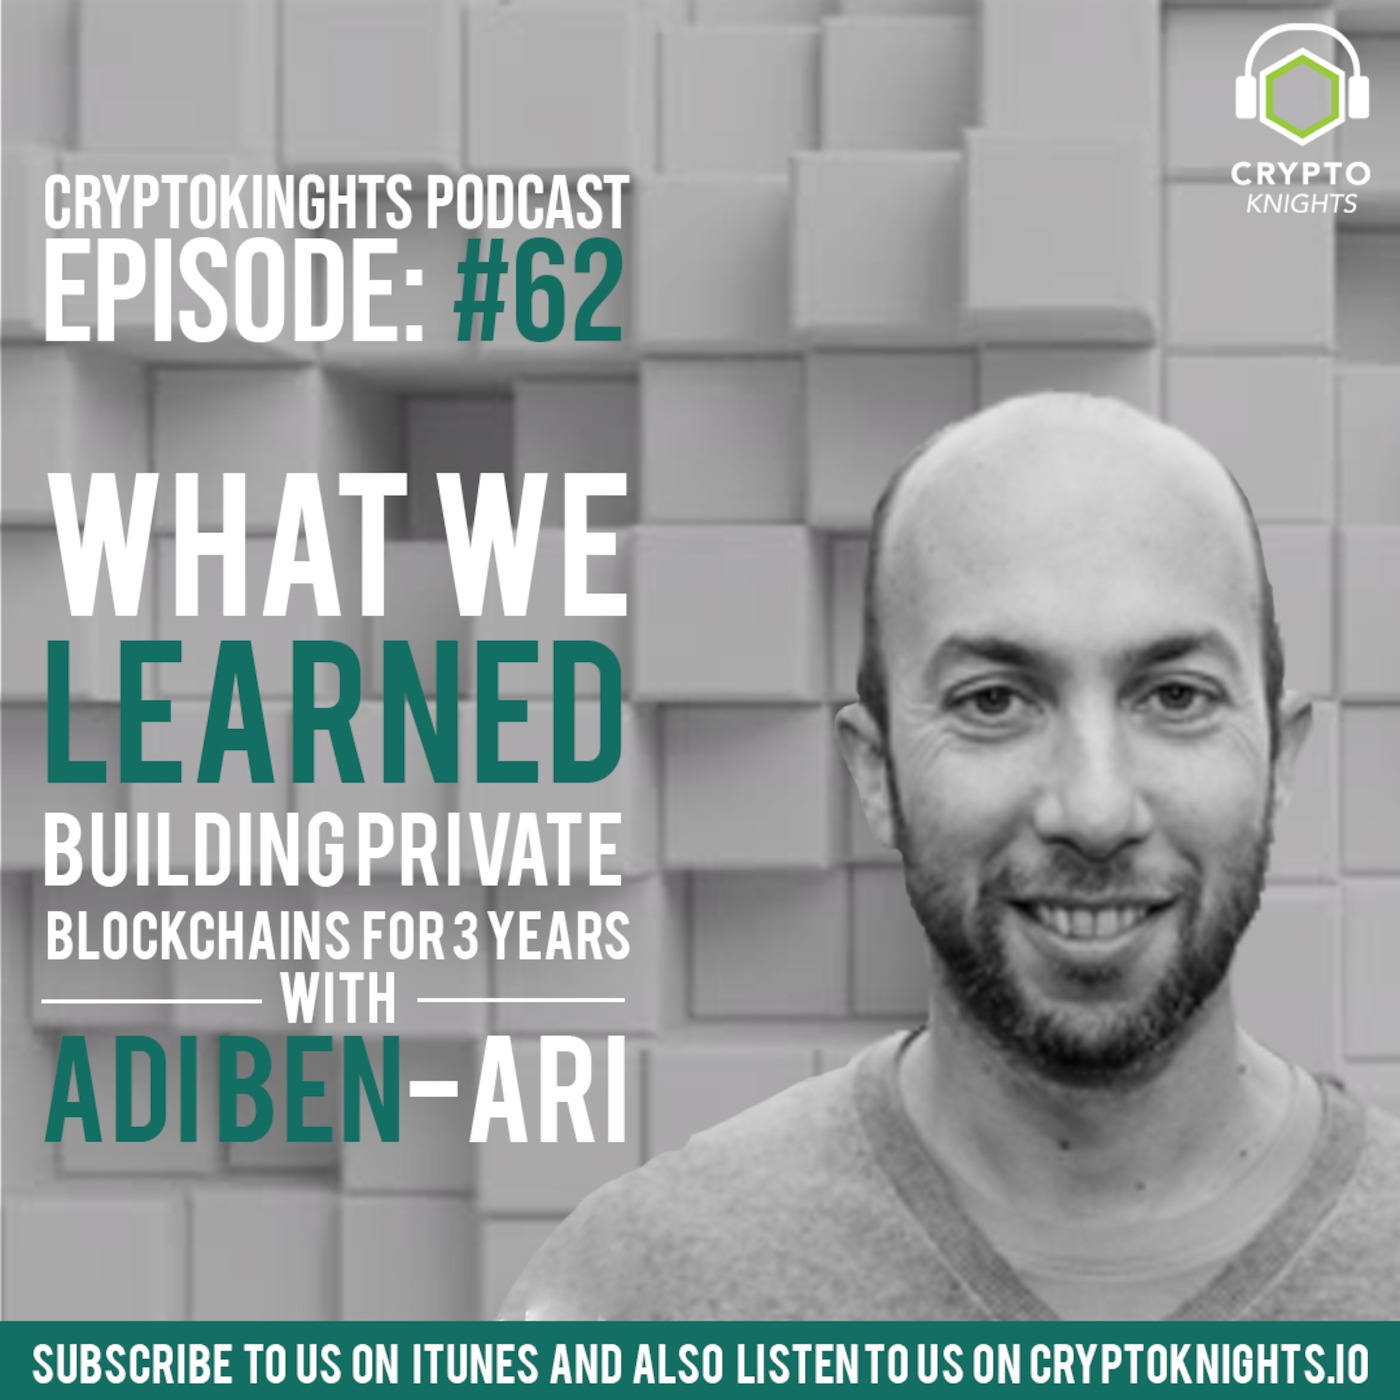 Episode 62 - What We Learned Building Private Blockchains For 3 Years